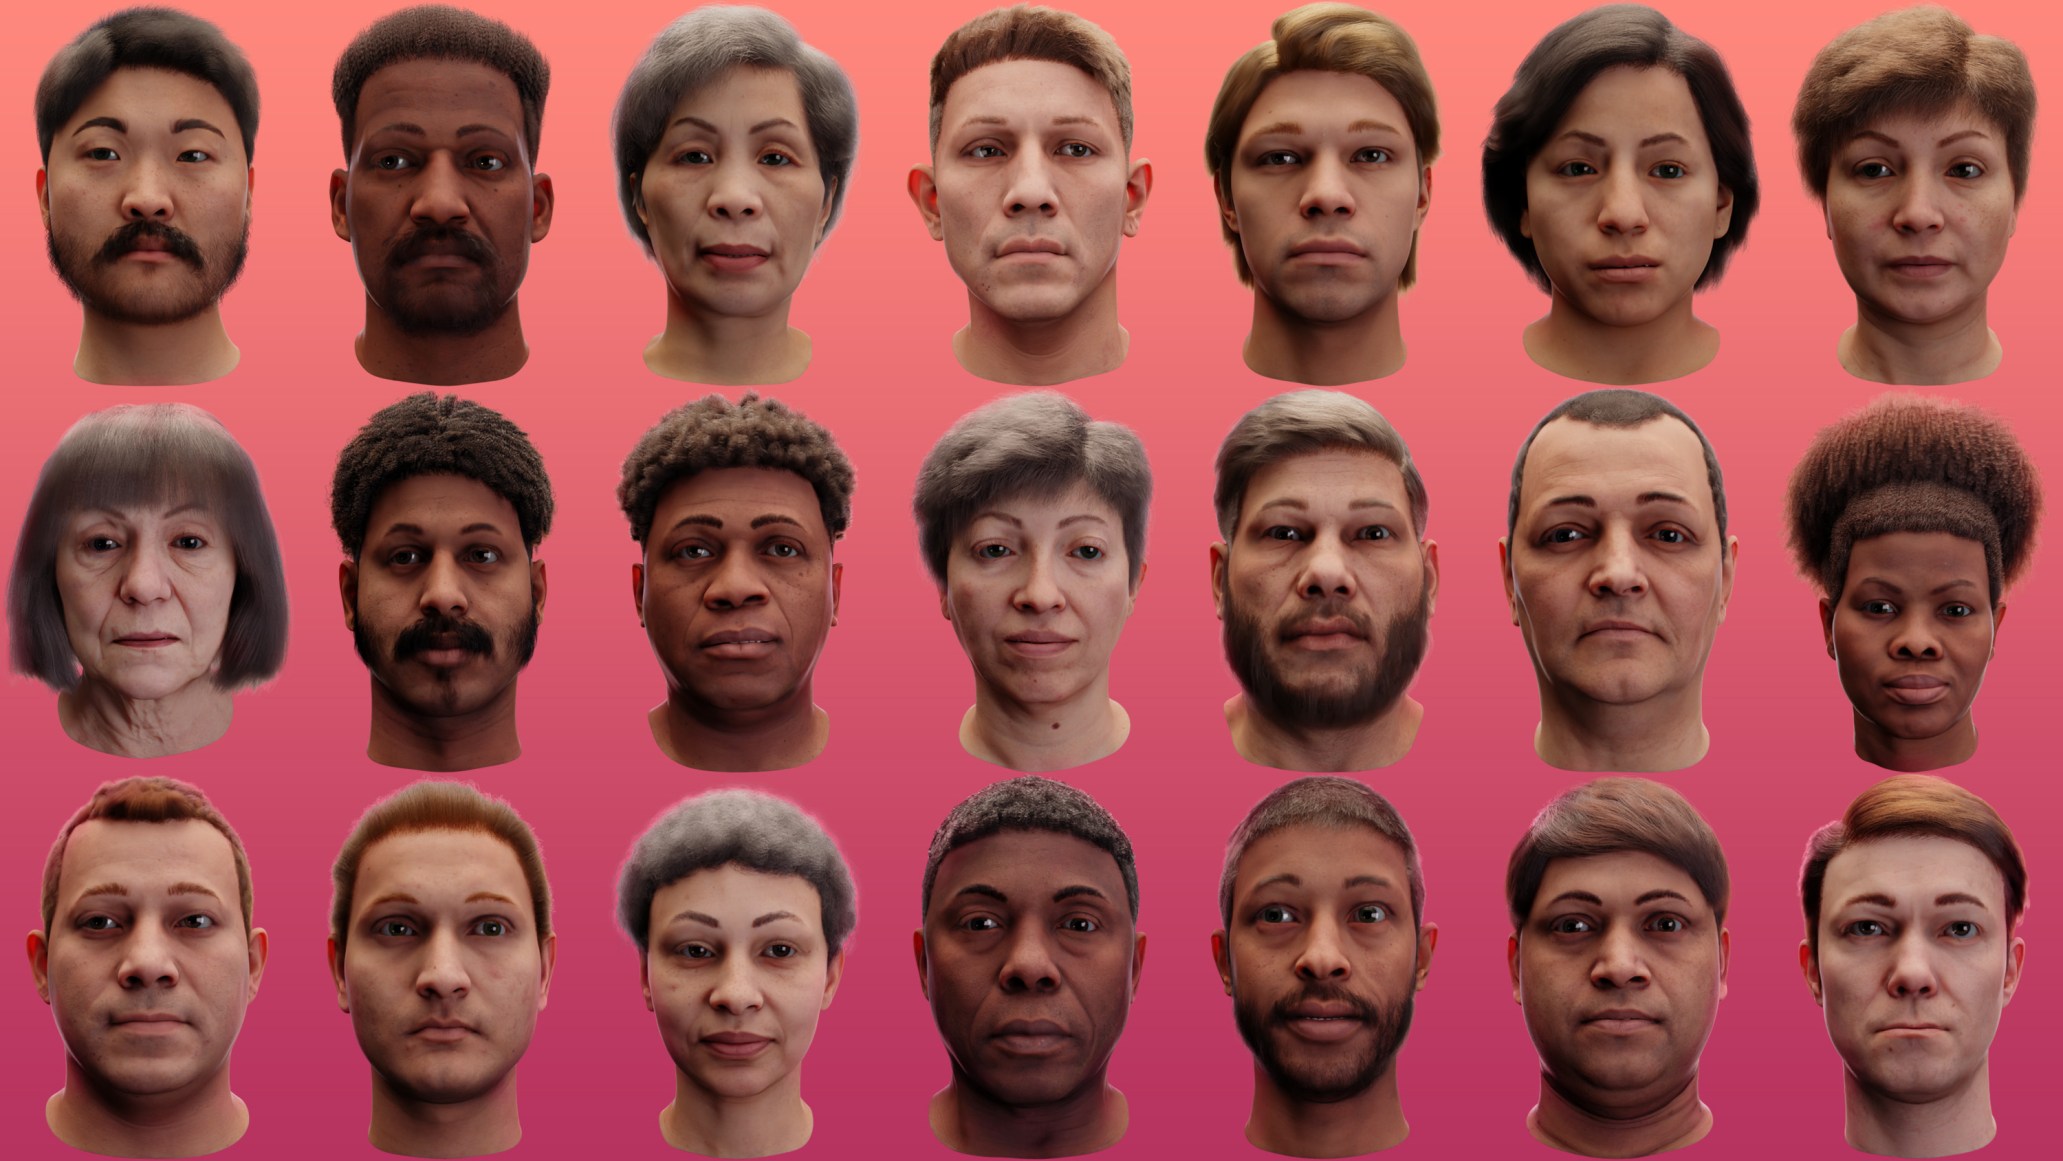 These creepy fake humans herald a new age in AI